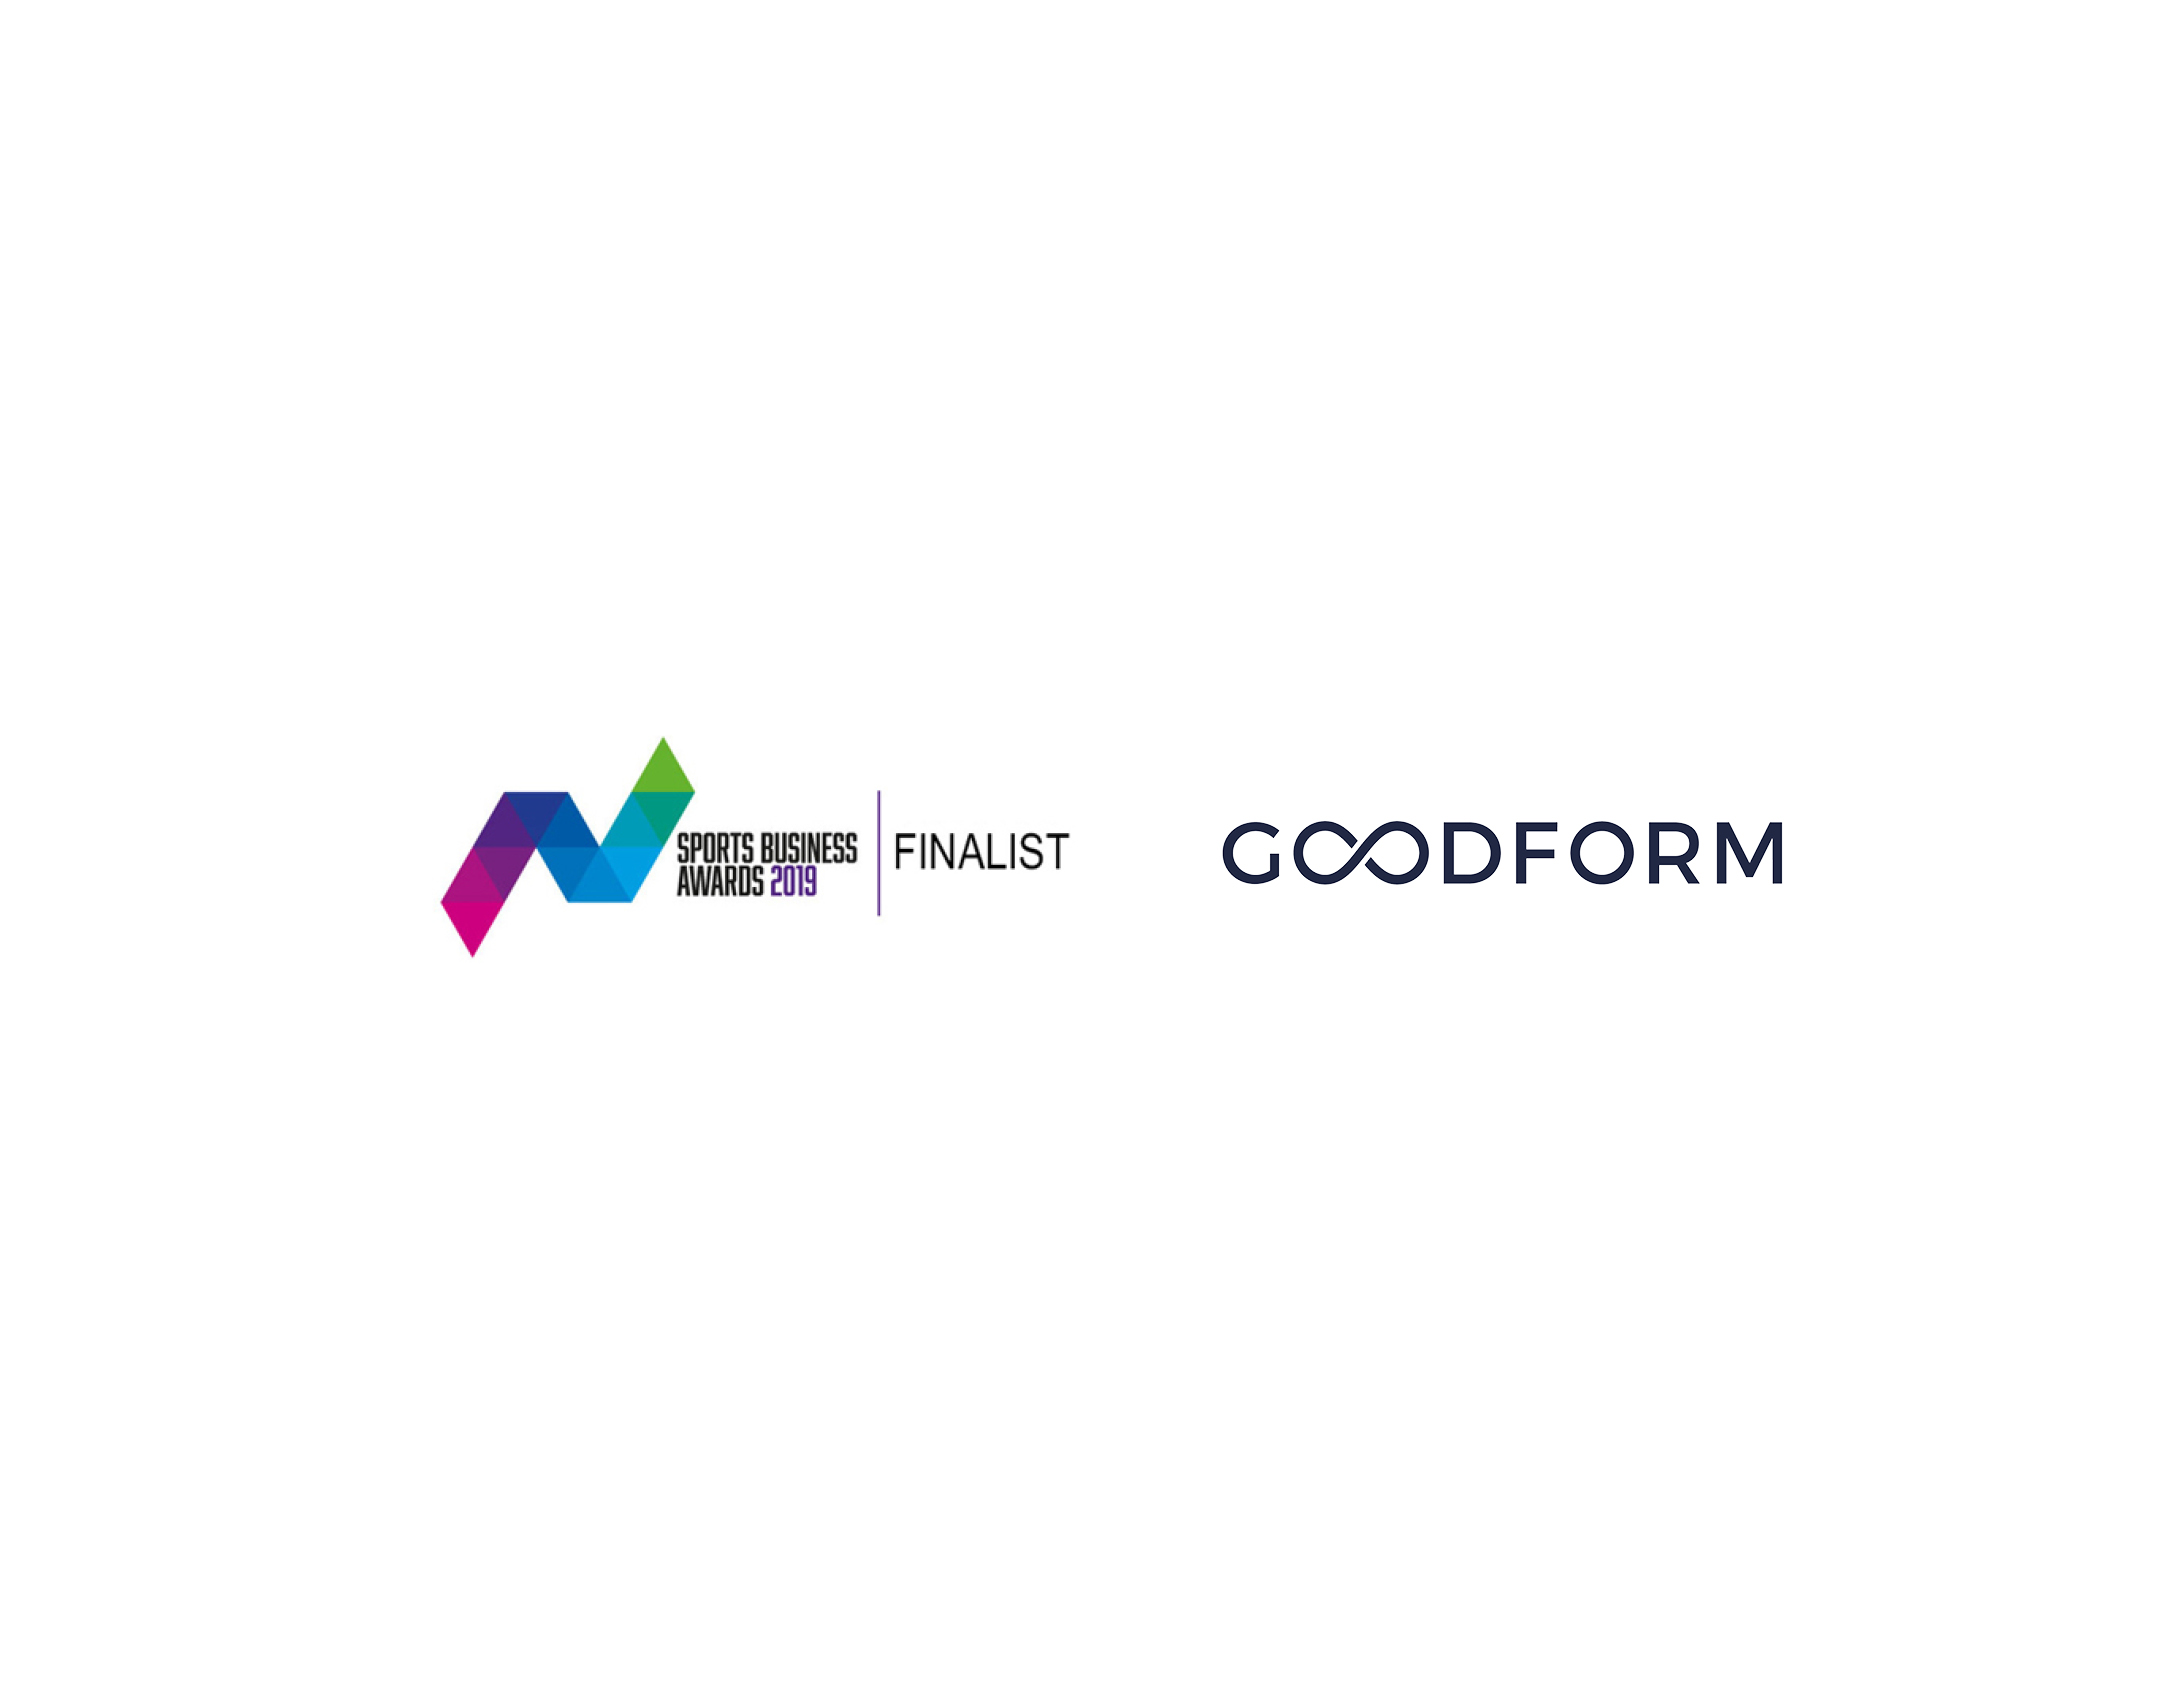 Success for Goodform at the 2019 Sports Business Awards